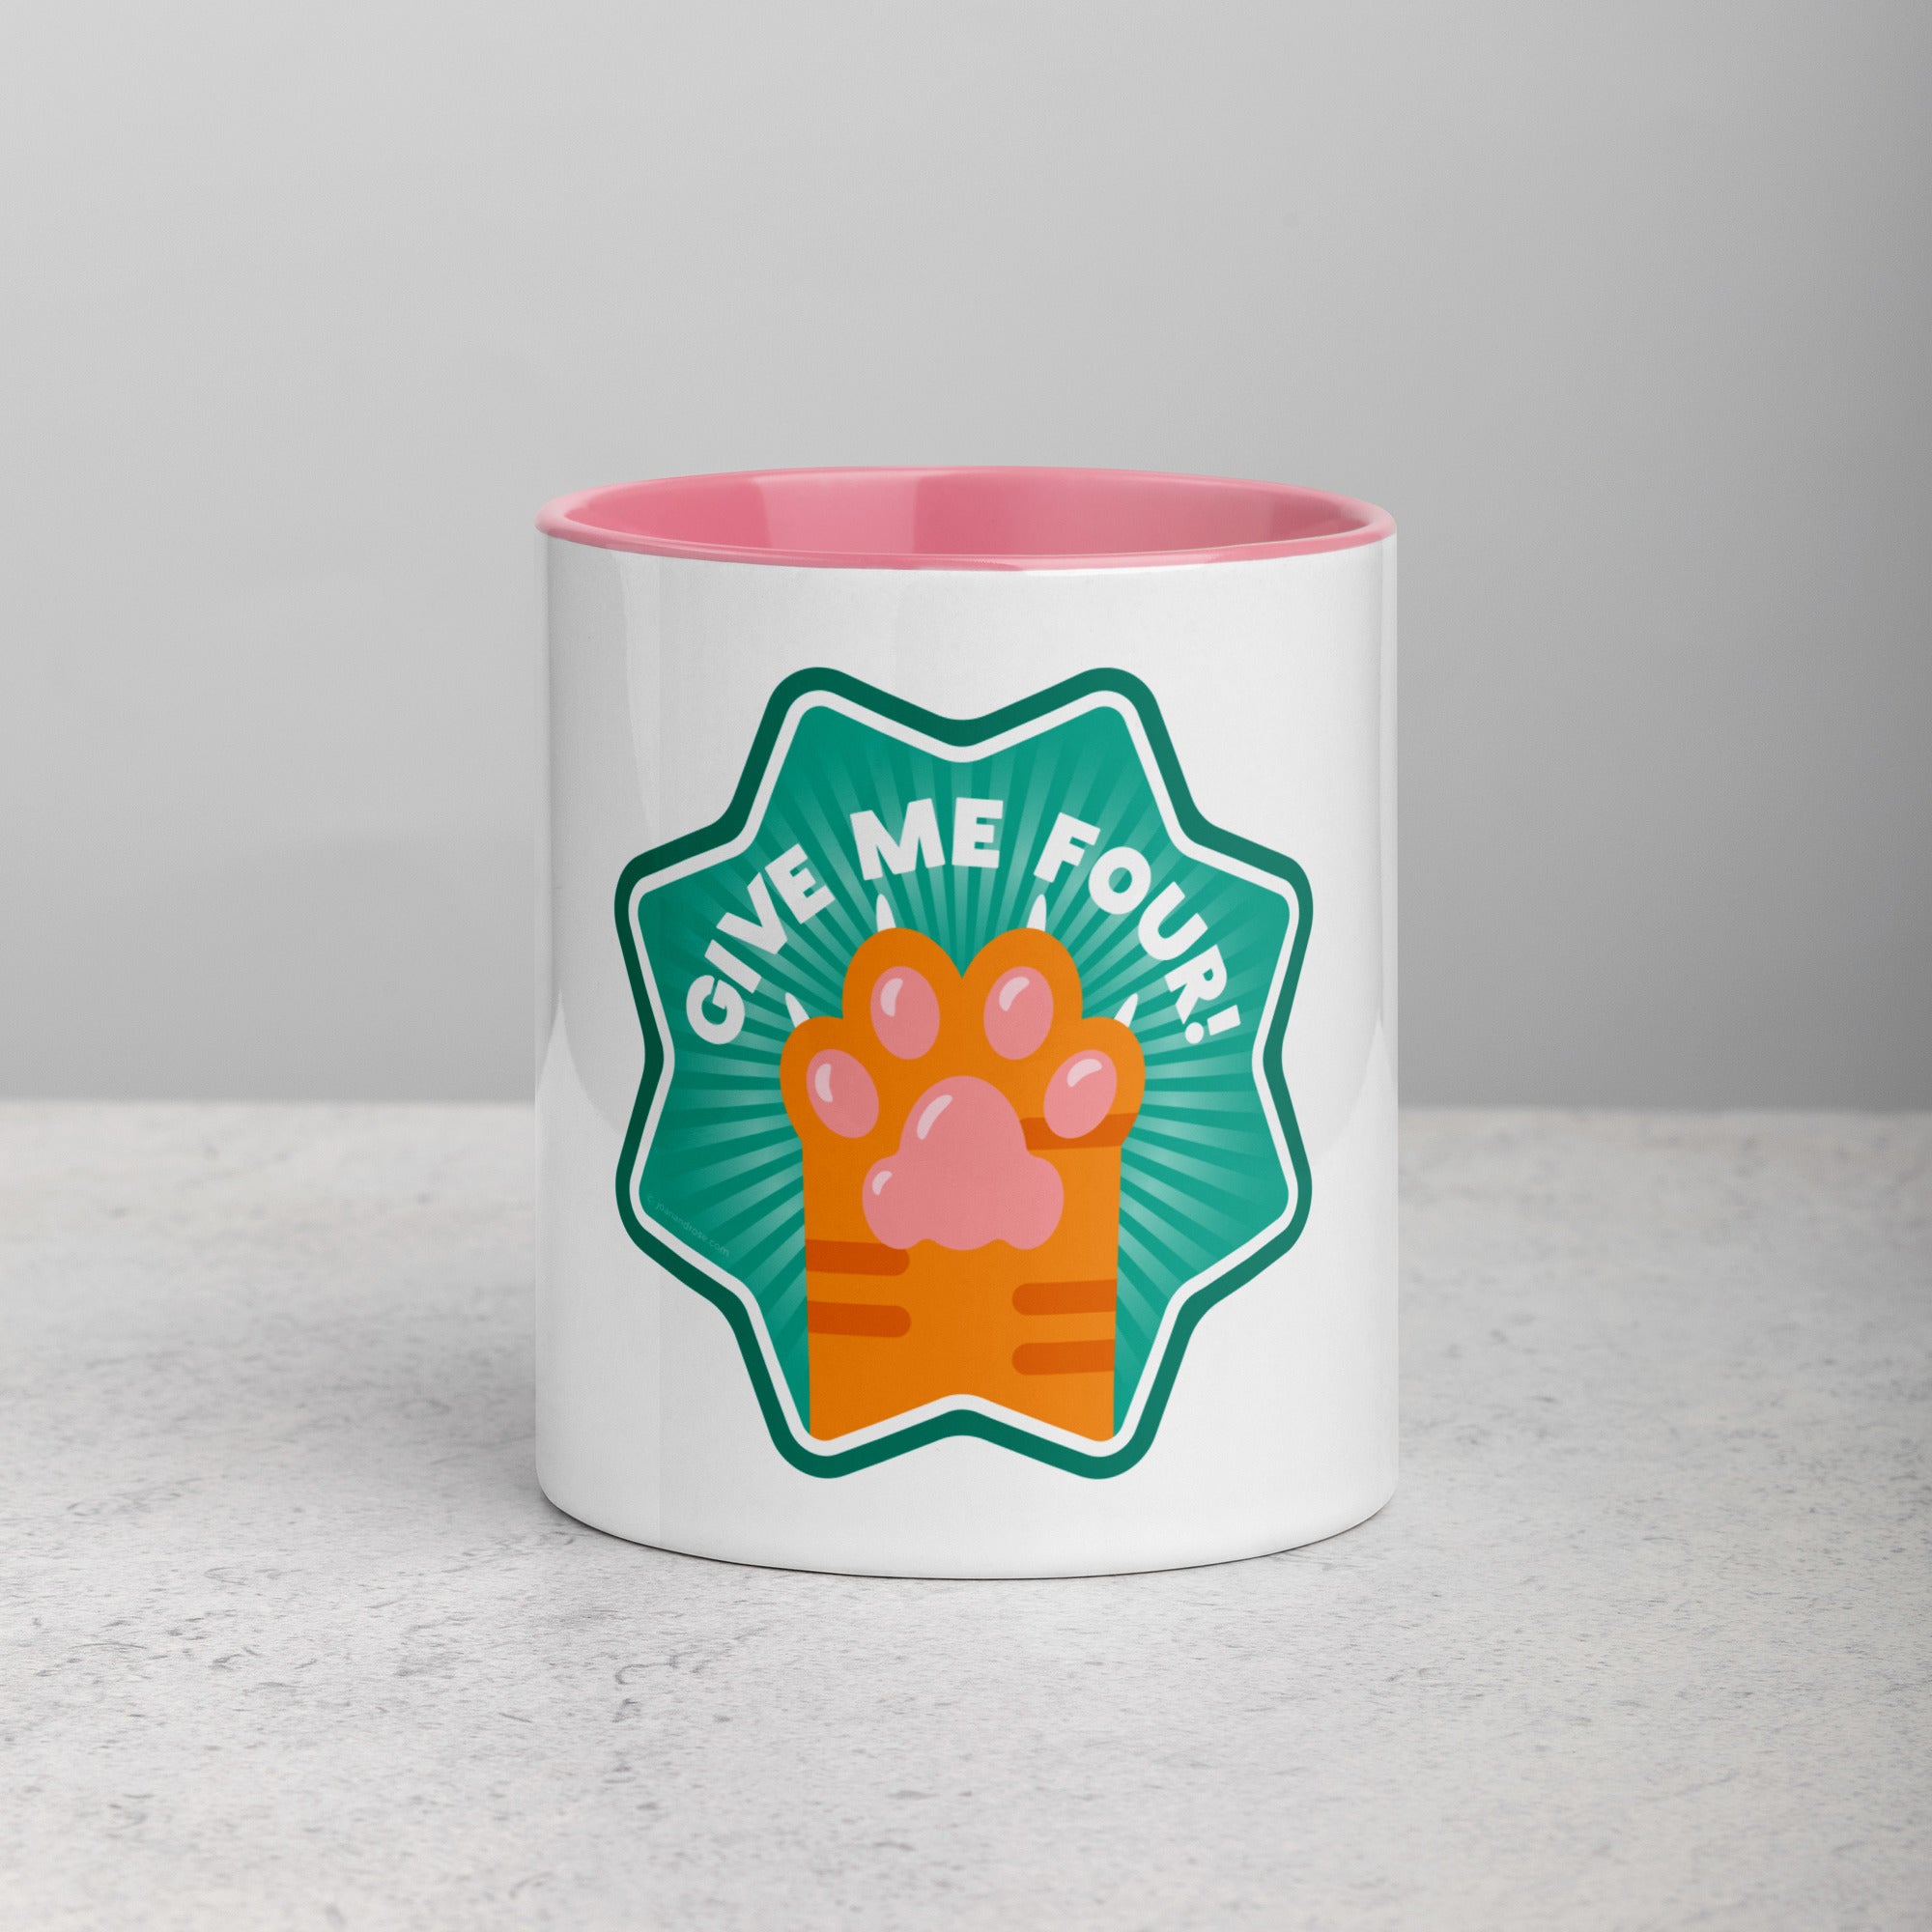 front facing image of a white mug with pink interior and handle. Mug has image of a ginger cats paw on an aqua 8 sided star with the text 'give me four' 